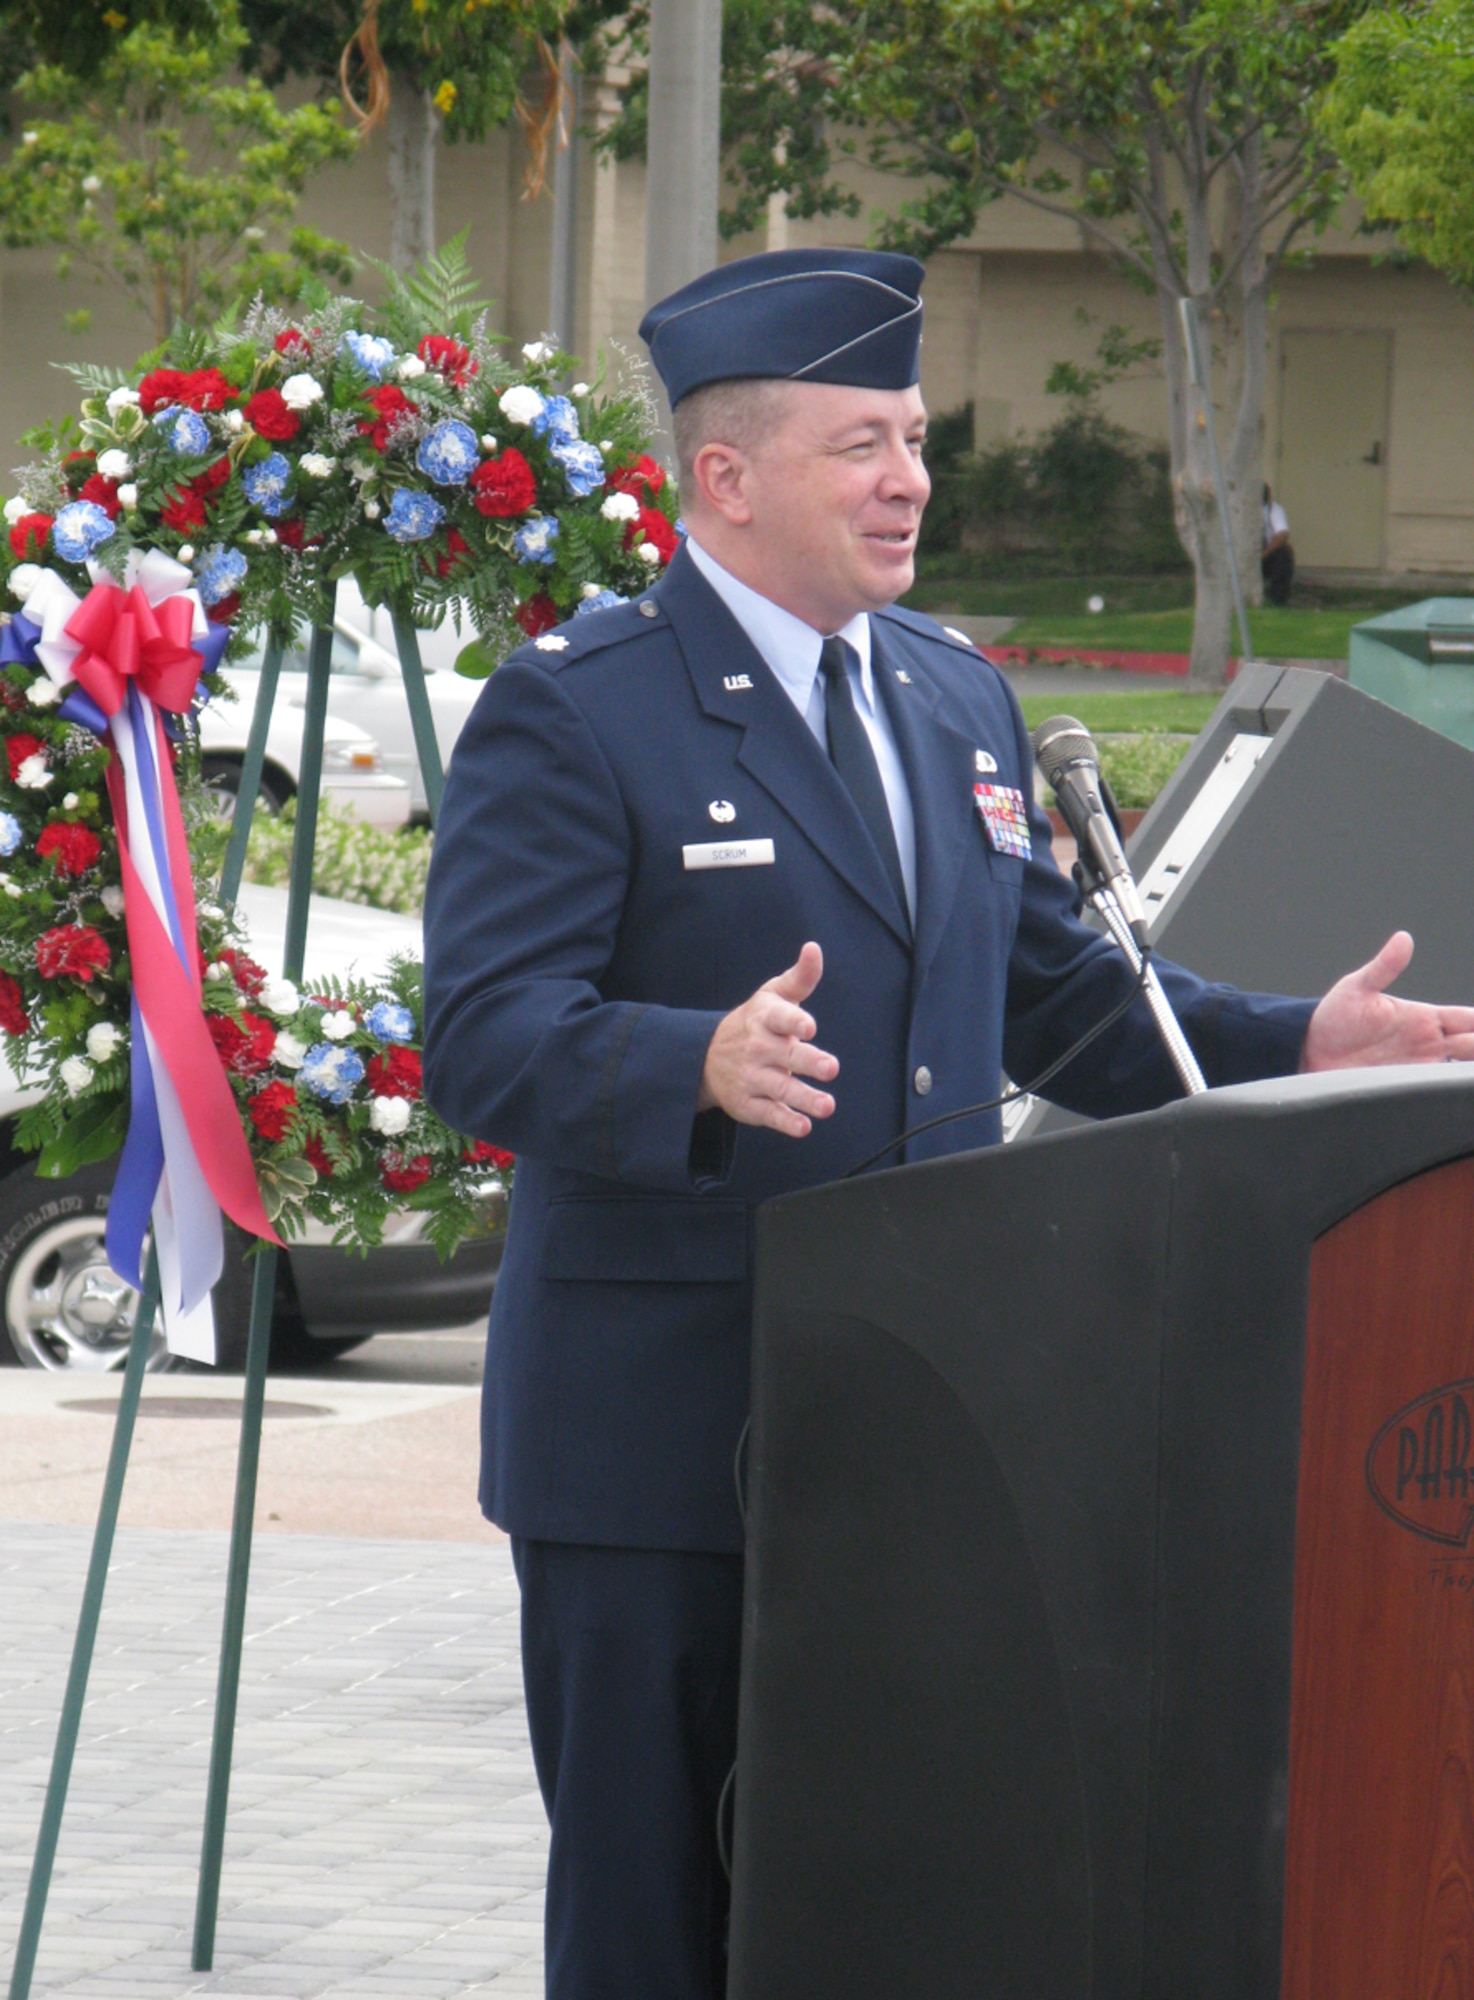 Lt. Col. Brett Scrum, 61st Contracting Squadron commander, delivered a Memorial Day speech in Paramount, May 26.  Members of the Paramount City Council and the Paramount Elks Lodge, as well as approximately 75 guests attended the event.